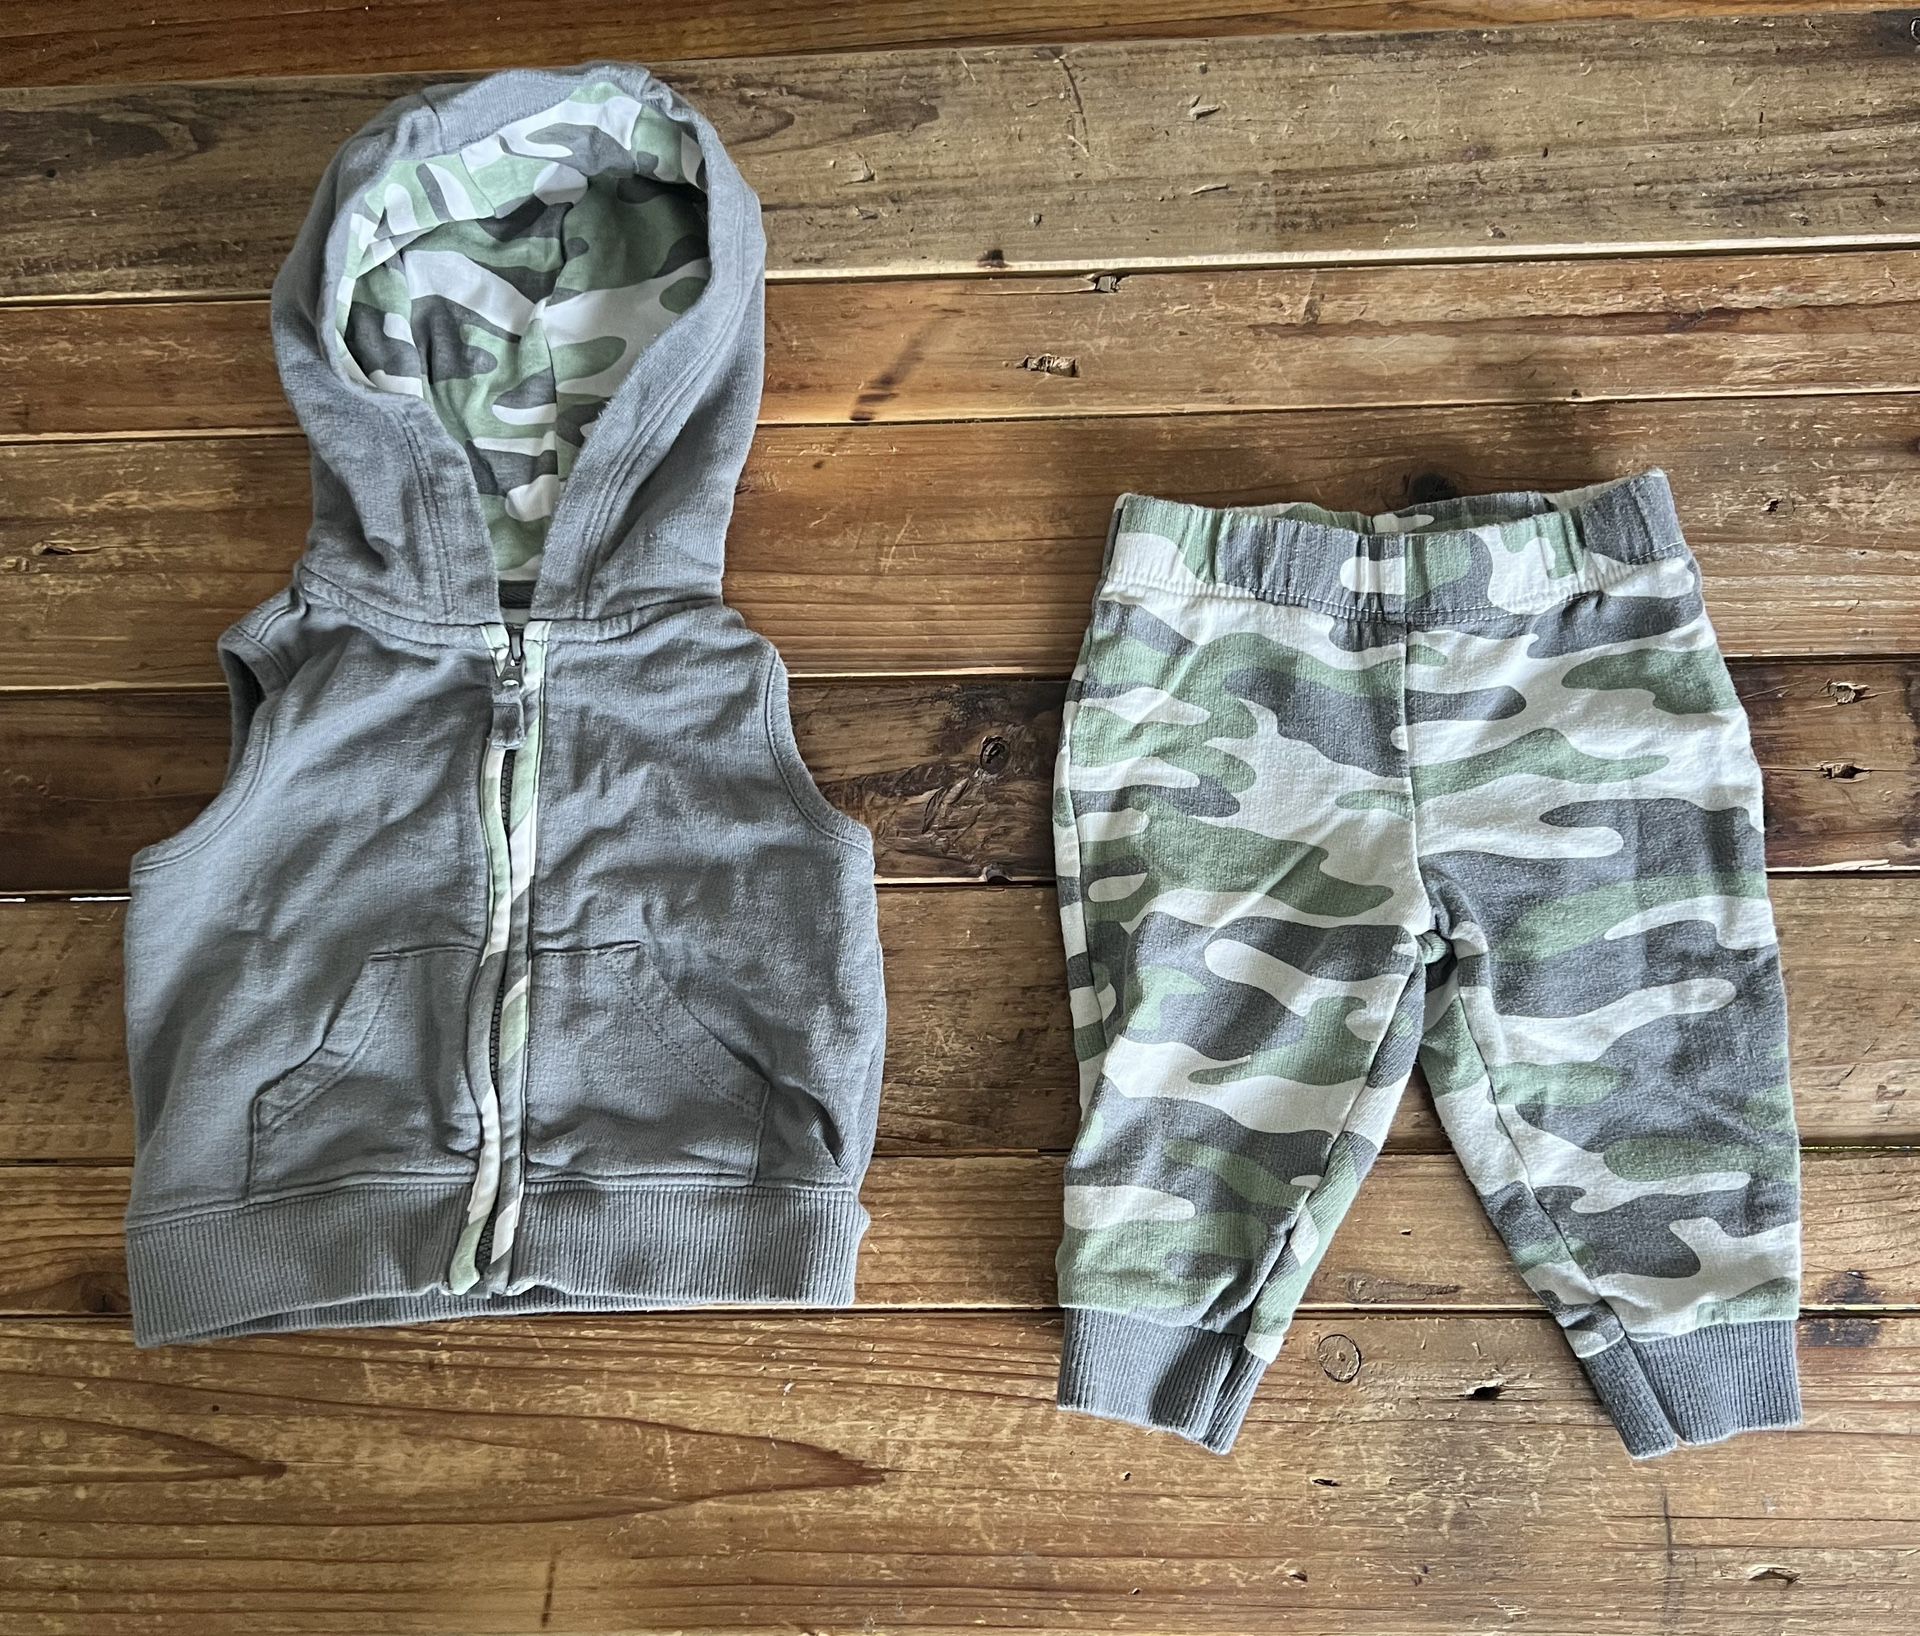 Carter’s Grey & Camo Sleeveless Hooded Sweatsuit baby boy/girl cotton Outfit 6m